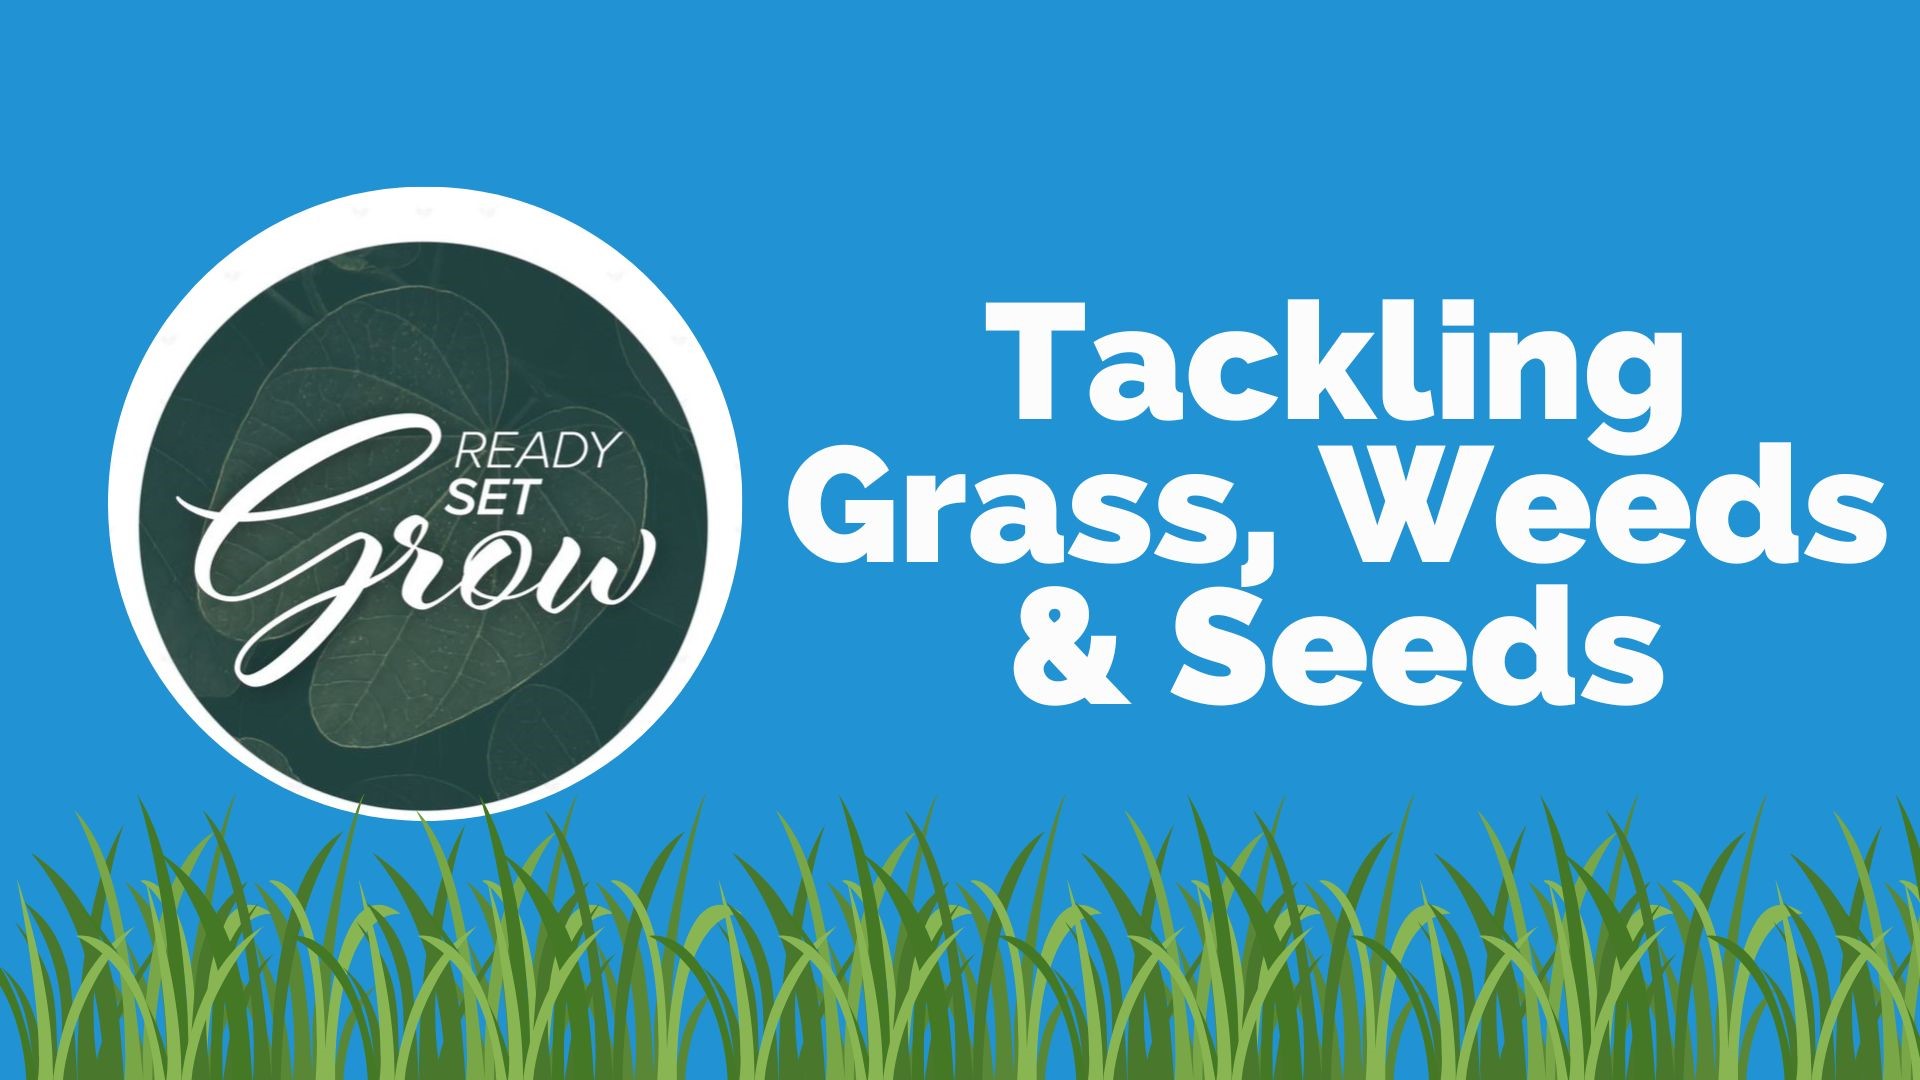 Getting you ready for all your spring planting with advice on planting grass seed, how to attract pollinators, ways to space out your seeds and more.